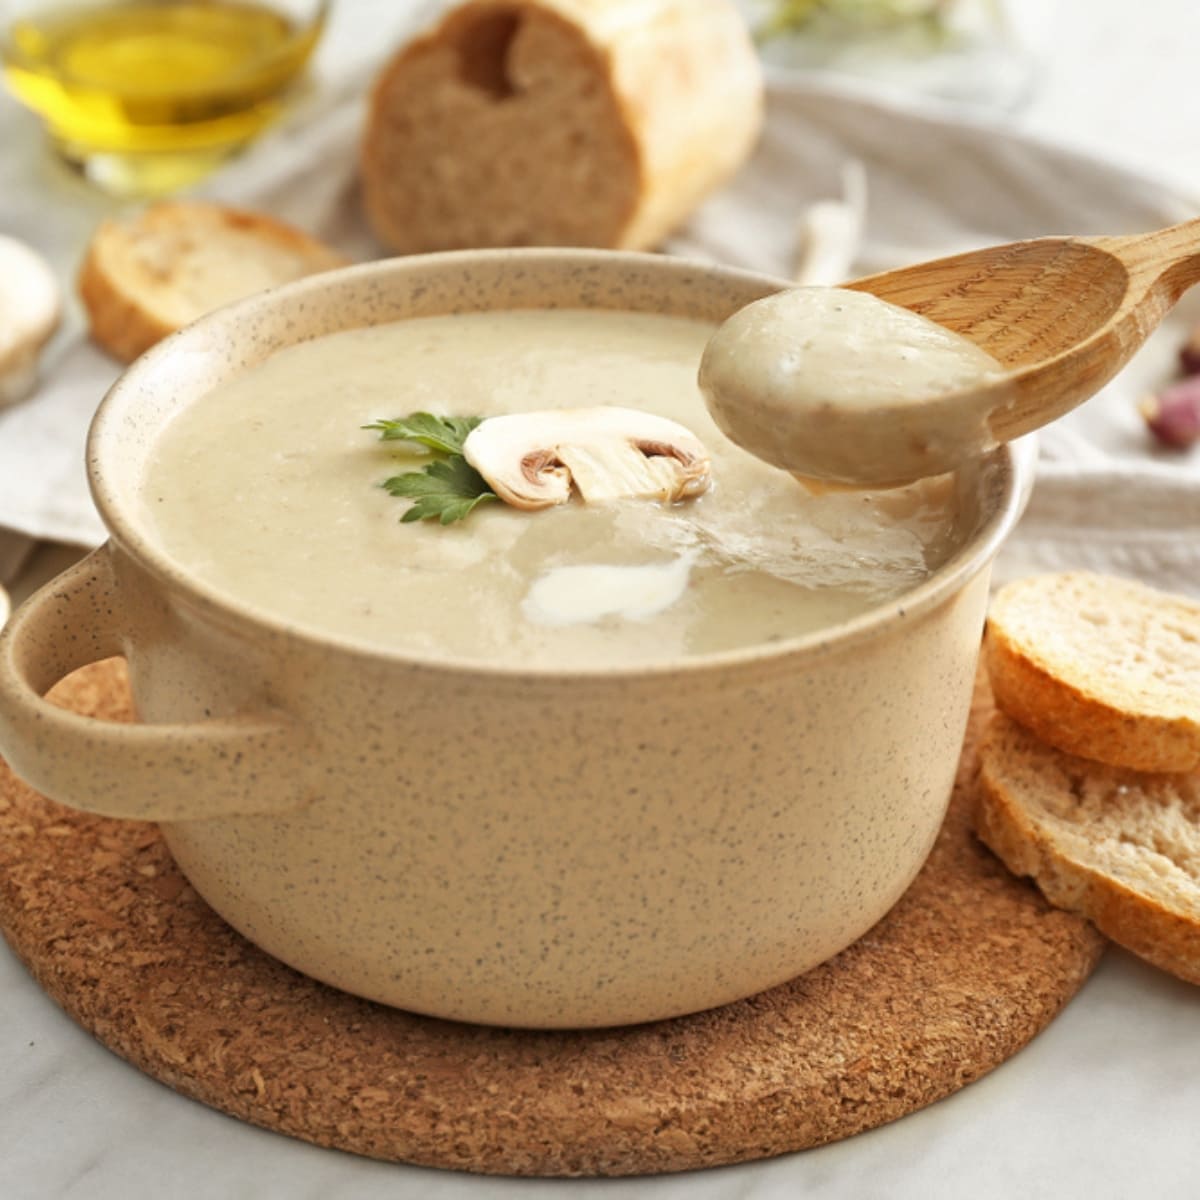 Pot of Creamy Mushroom Soup and a Wooden Spoon with Mushroom Soup on a Cork Trivet with Baguette Slices